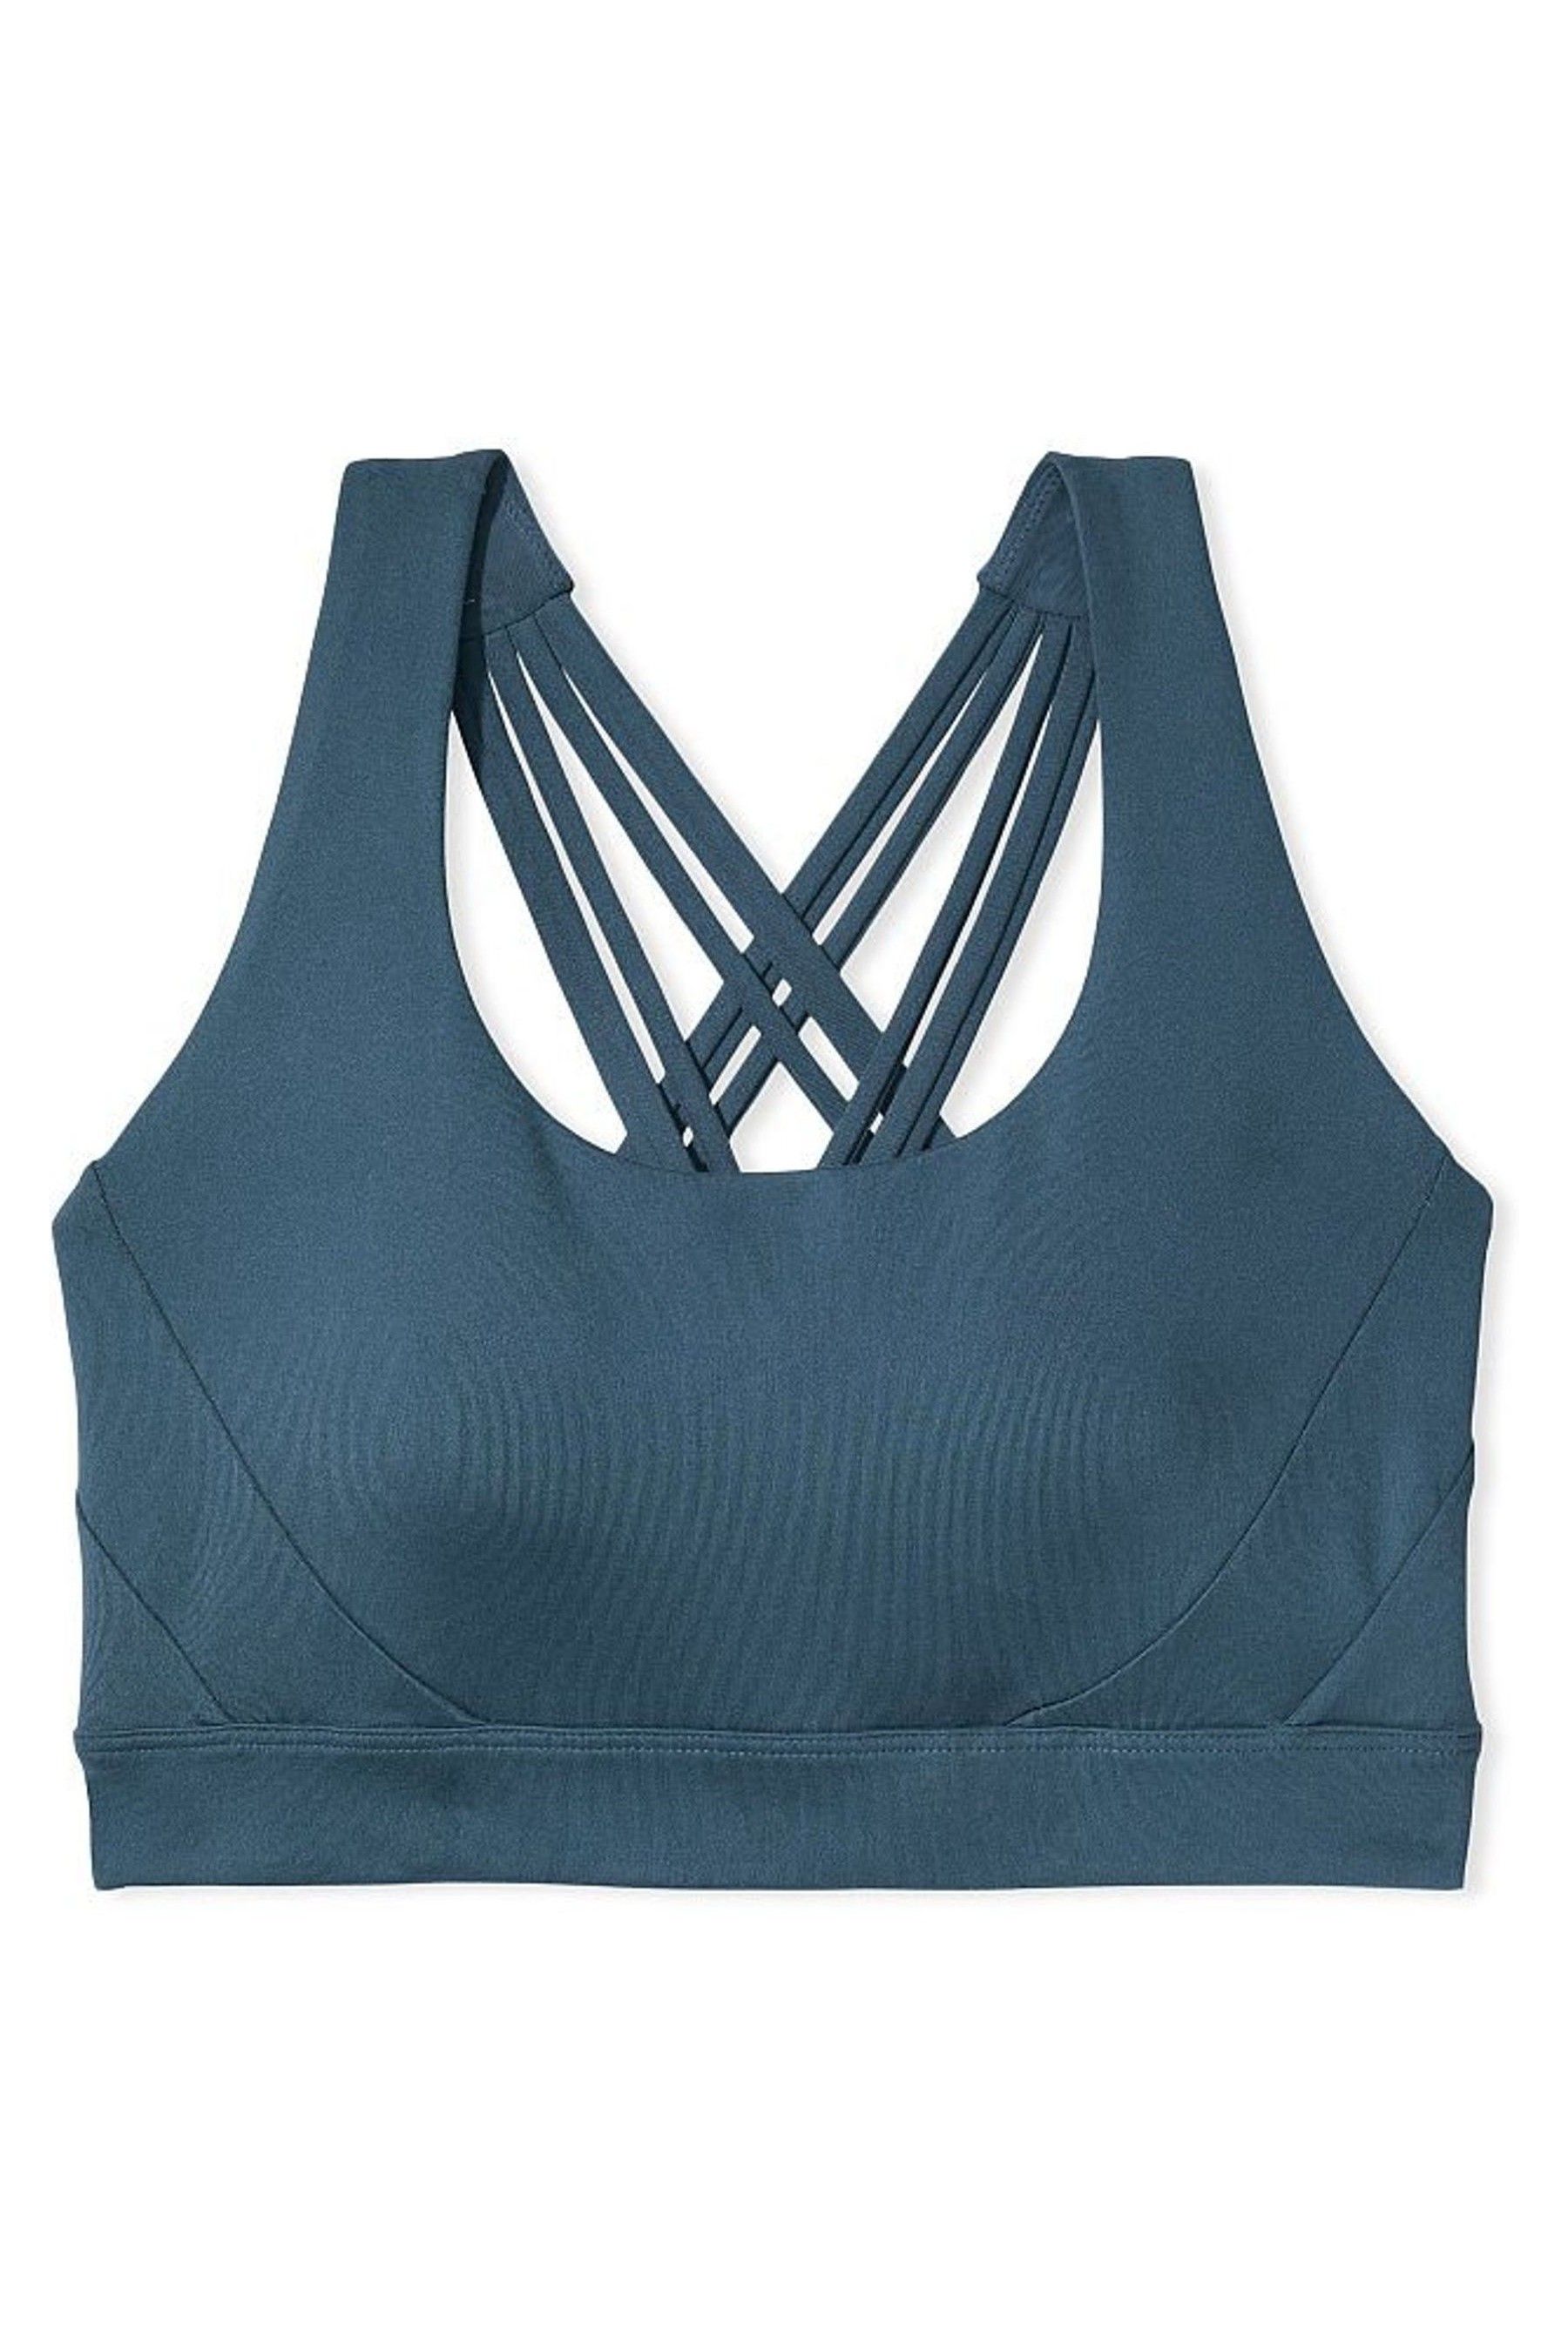 Buy Victoria's Secret Strappy Back Low Impact Sports Bra from the ...